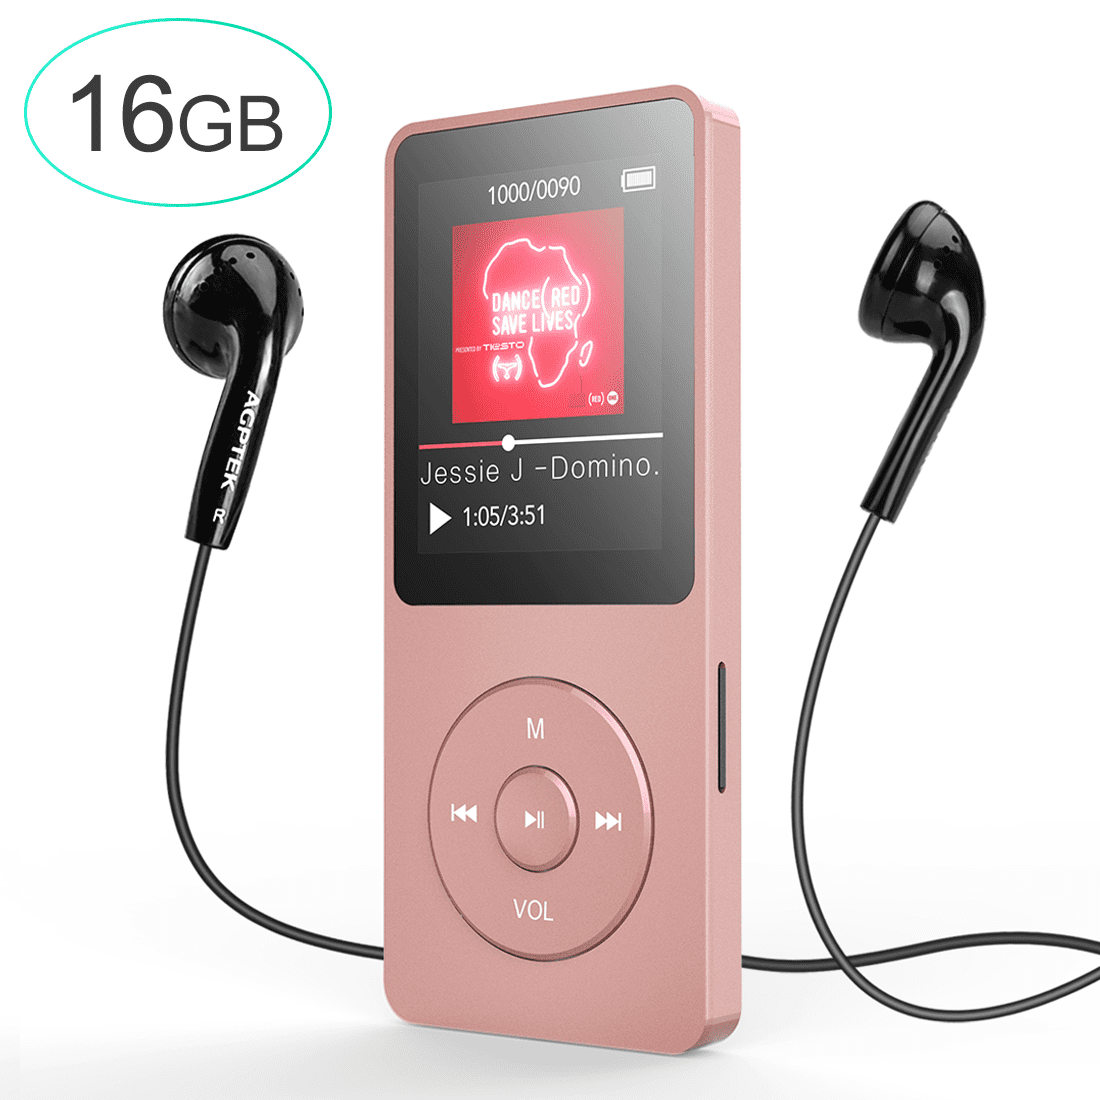 16GB MP3 Player with Bluetooth, AGPTEK Lossless Music Player with FM ...